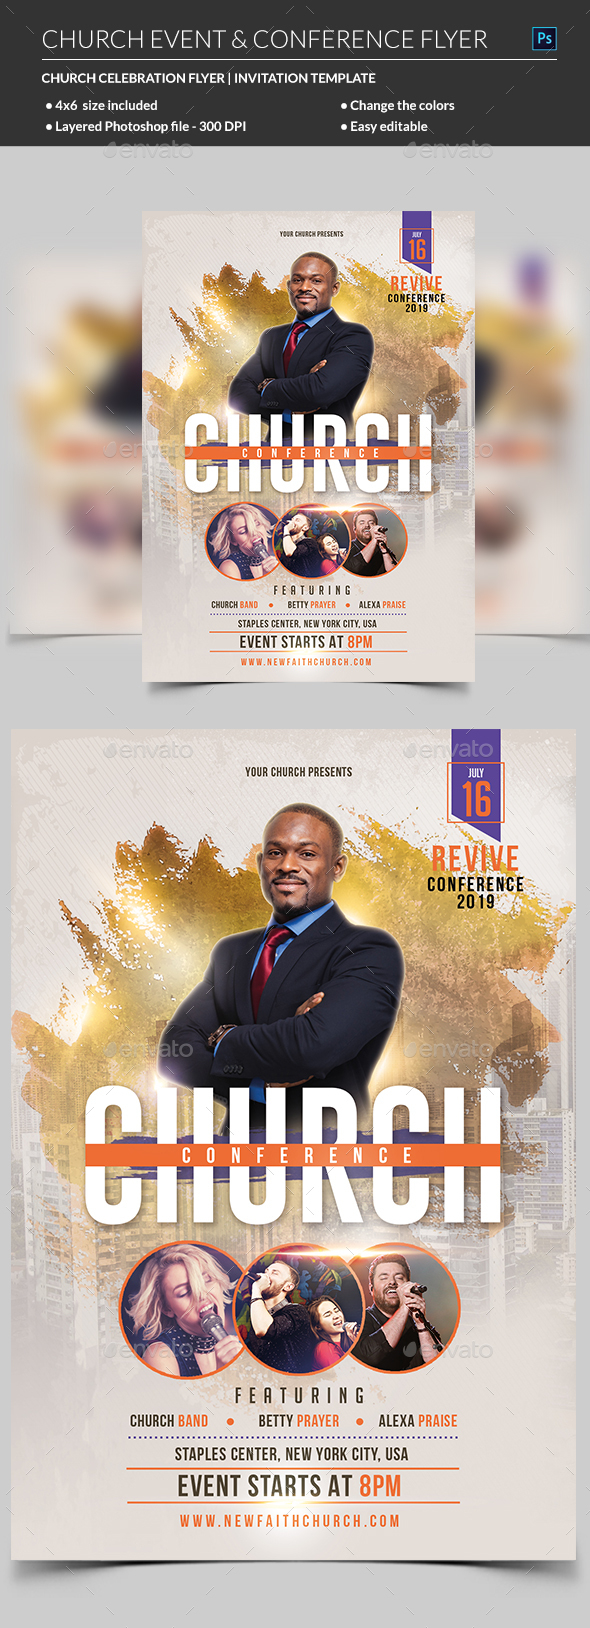 Church Event or Conference Flyer Template For Church Conference Flyer Template Inside Church Conference Flyer Template